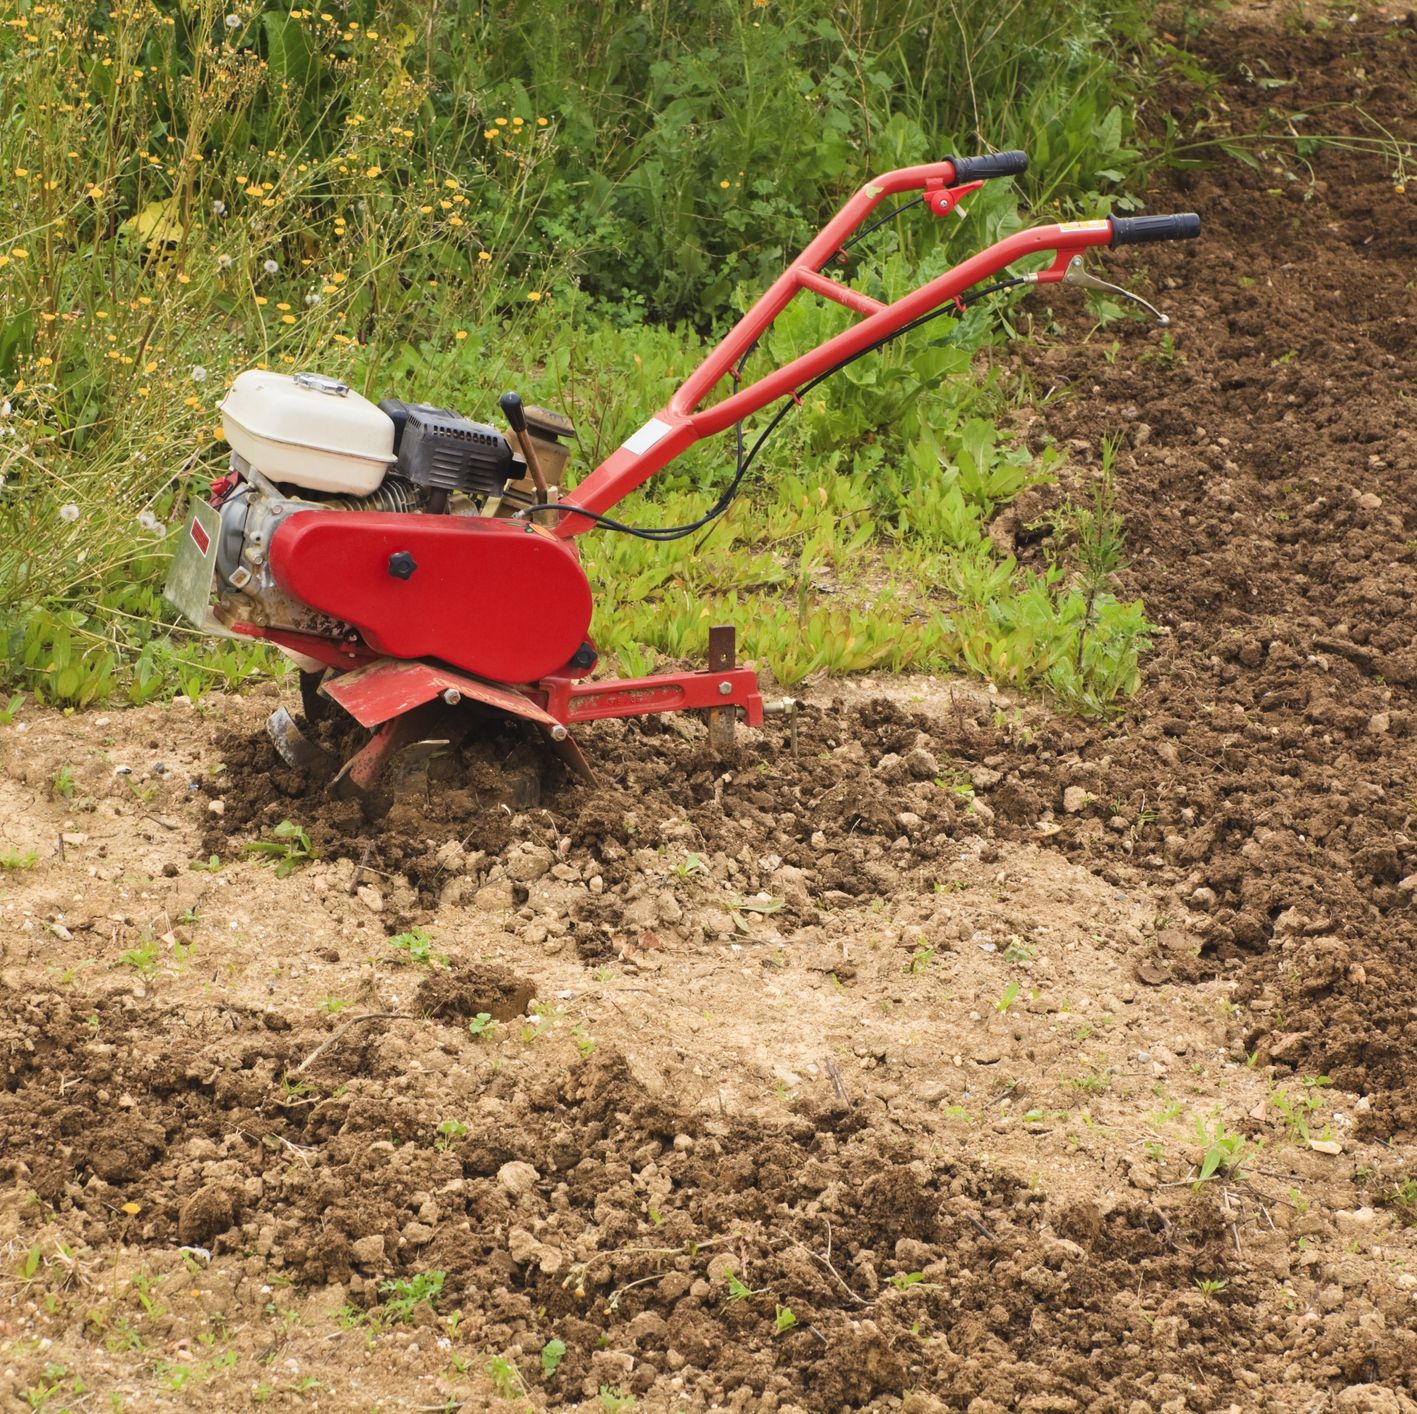 These Rototillers Turn Hard-Packed Dirt into Nutrient-Rich Soil